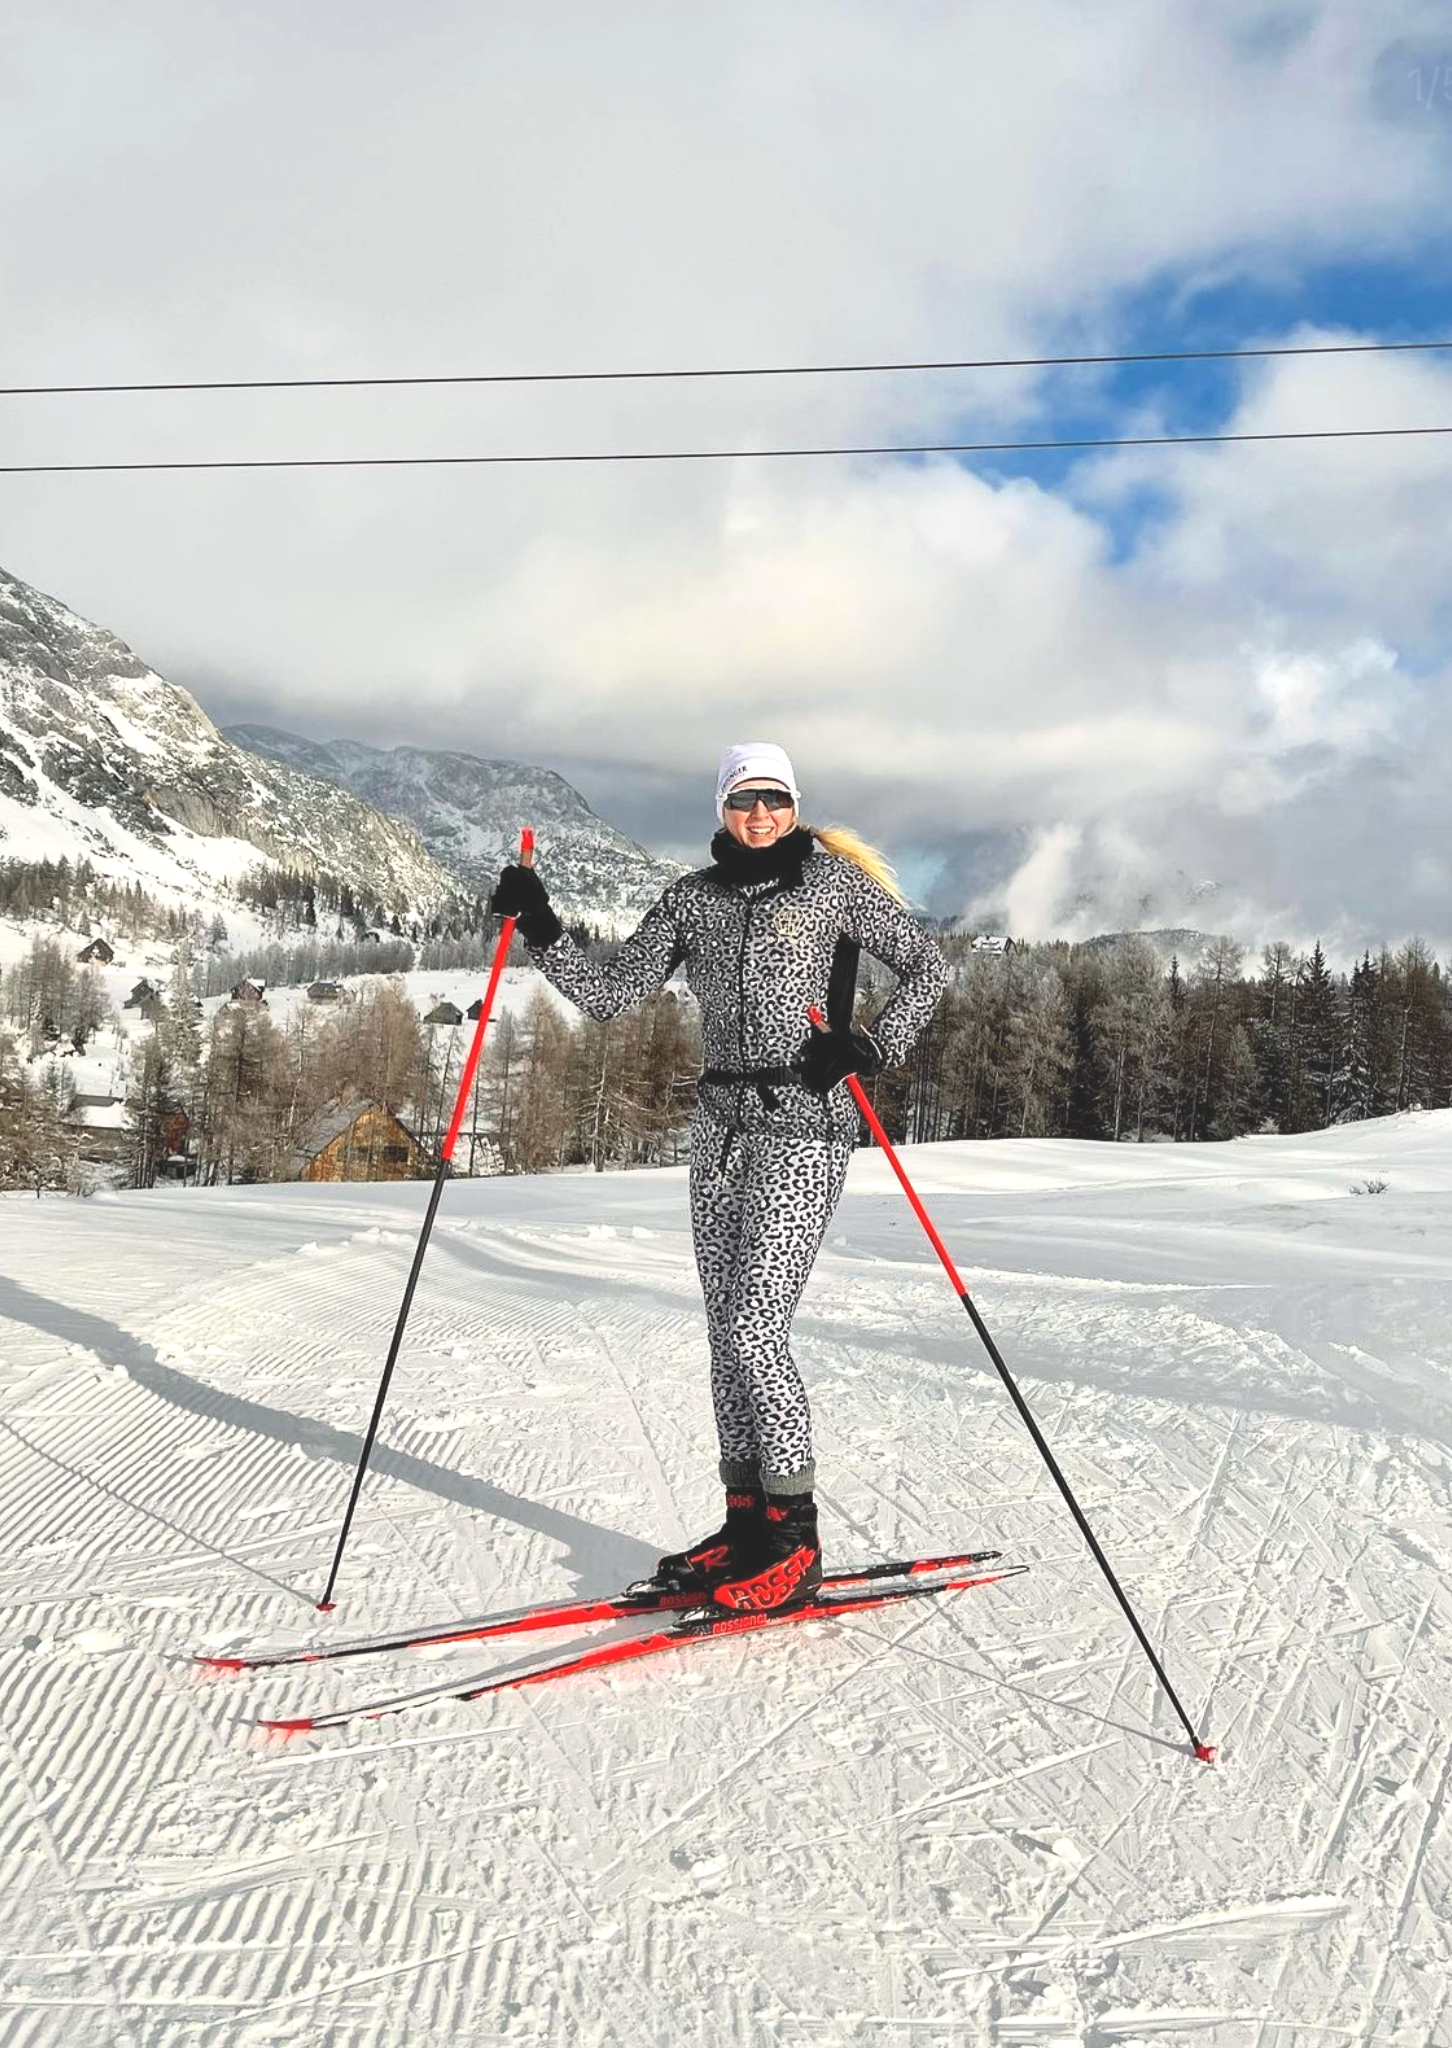 Benefits of Cross-country skiing